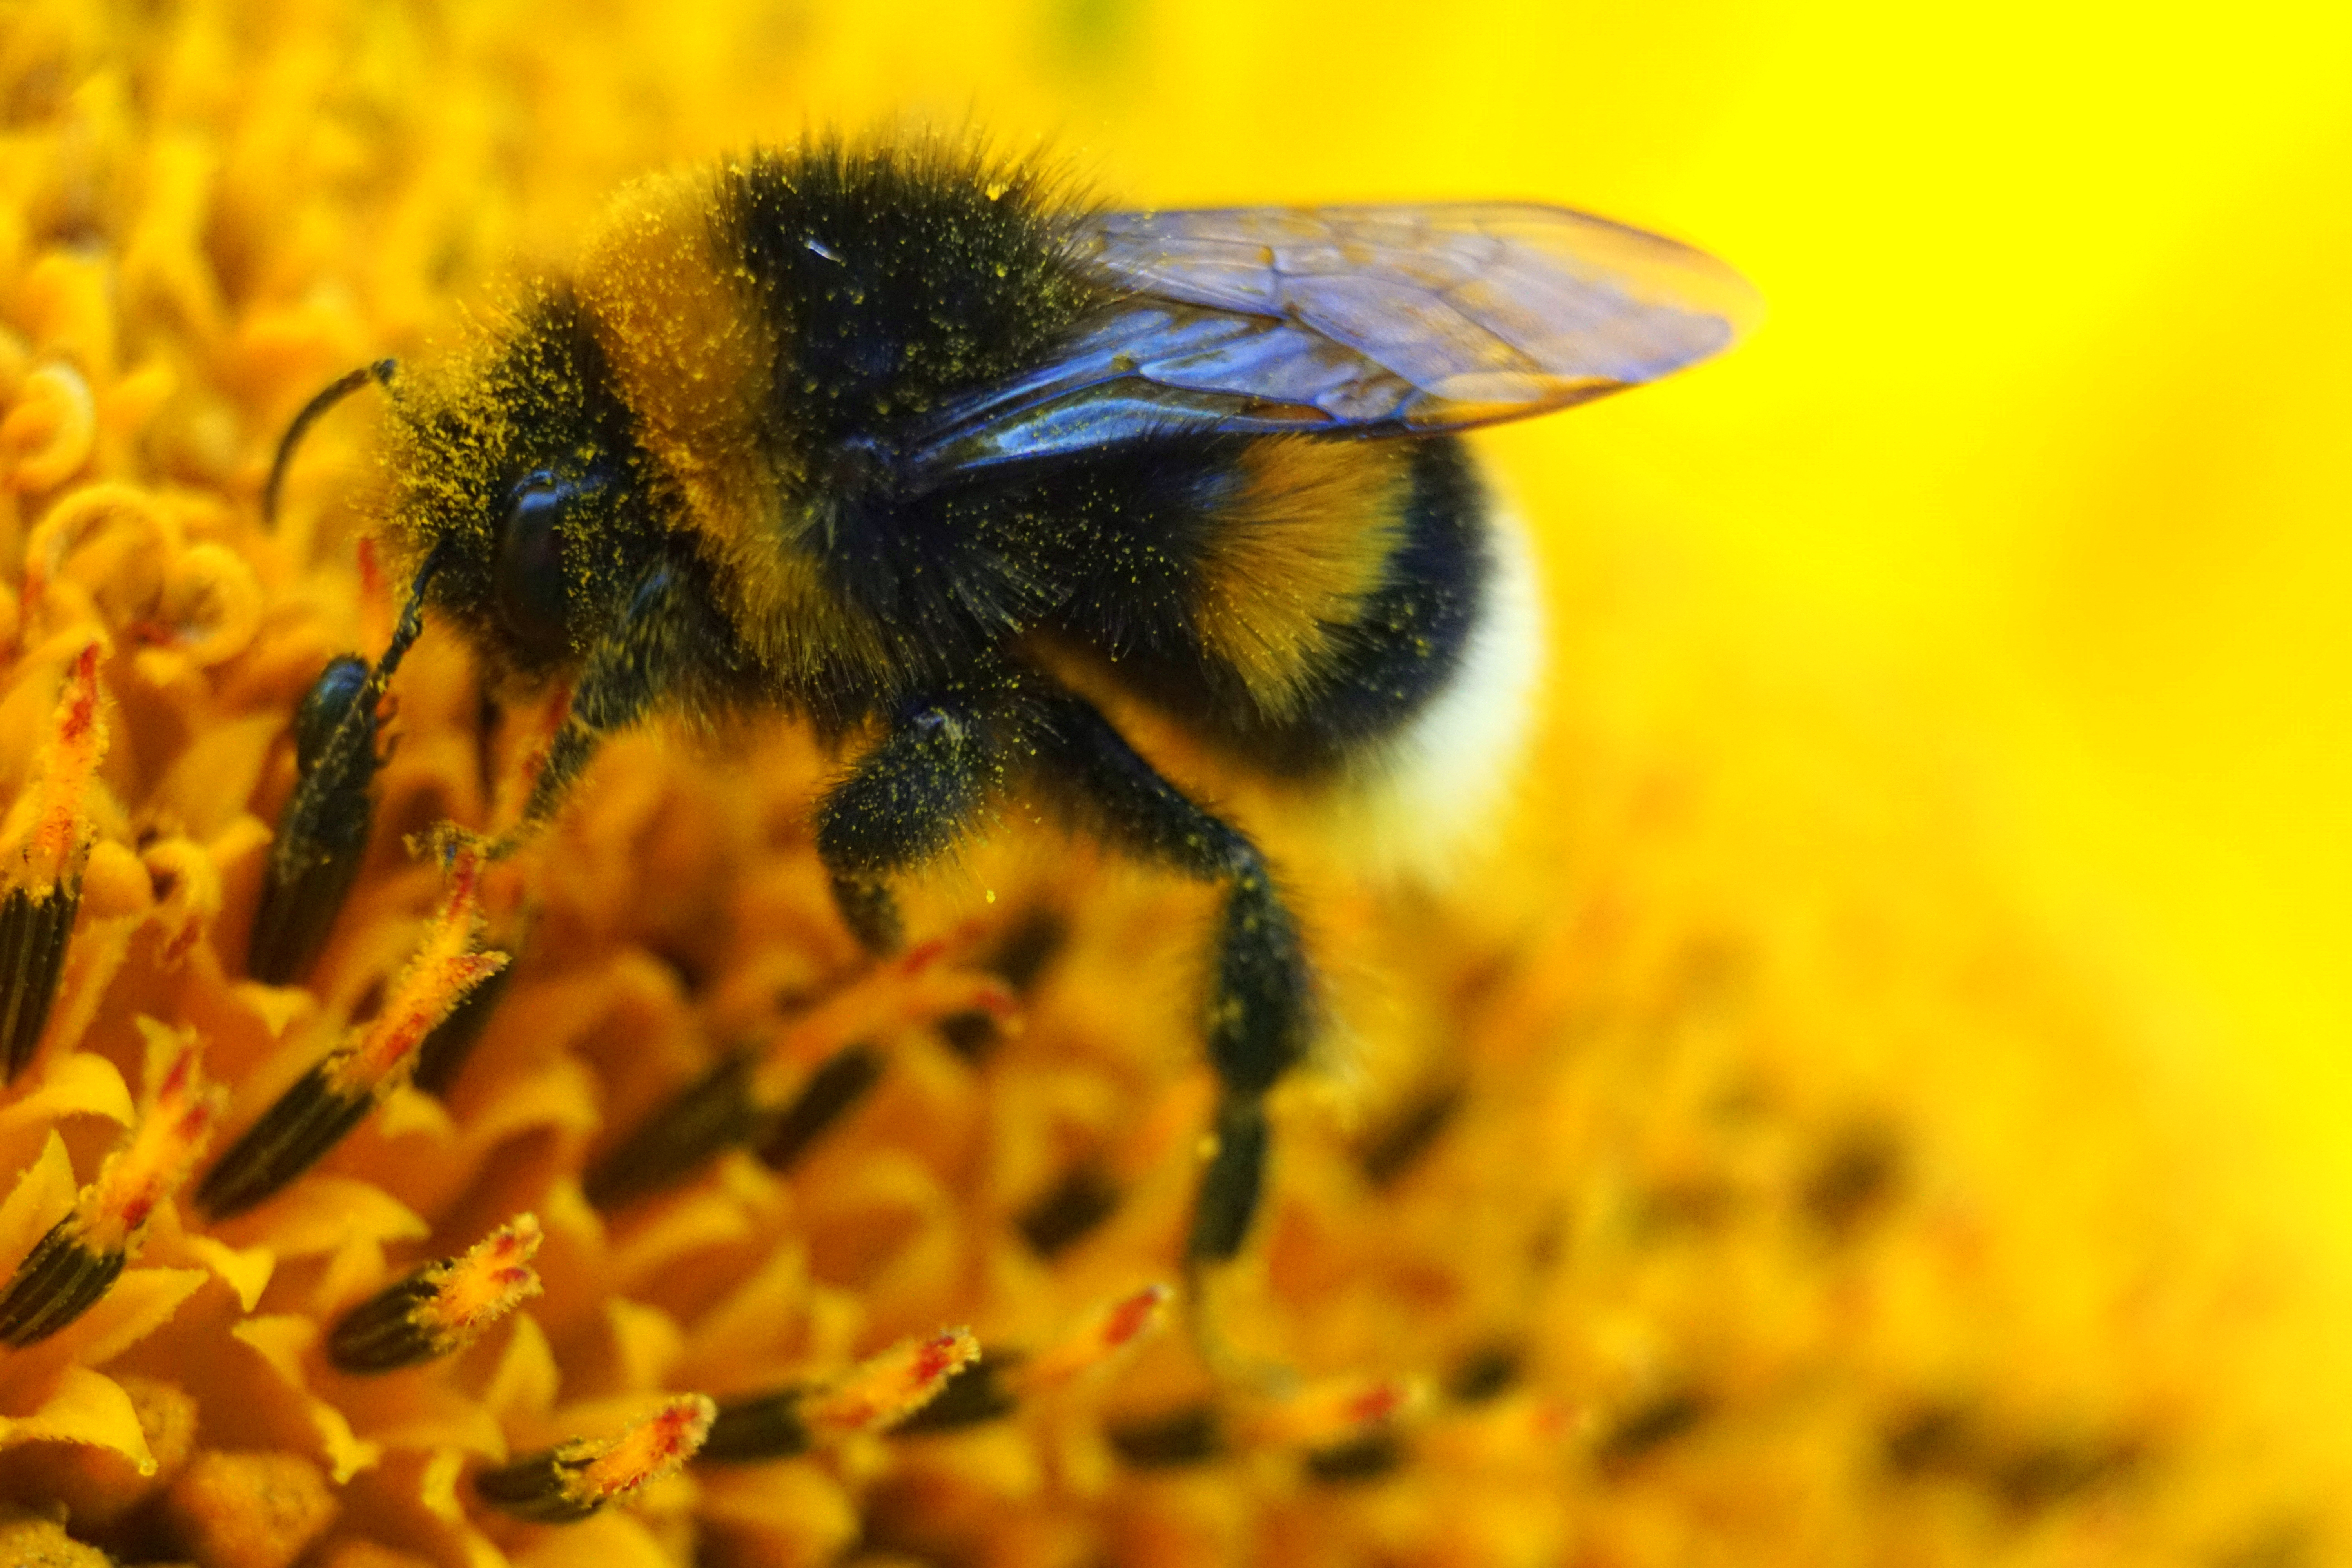 Sunflowers offer bees lots of pollen and nectar